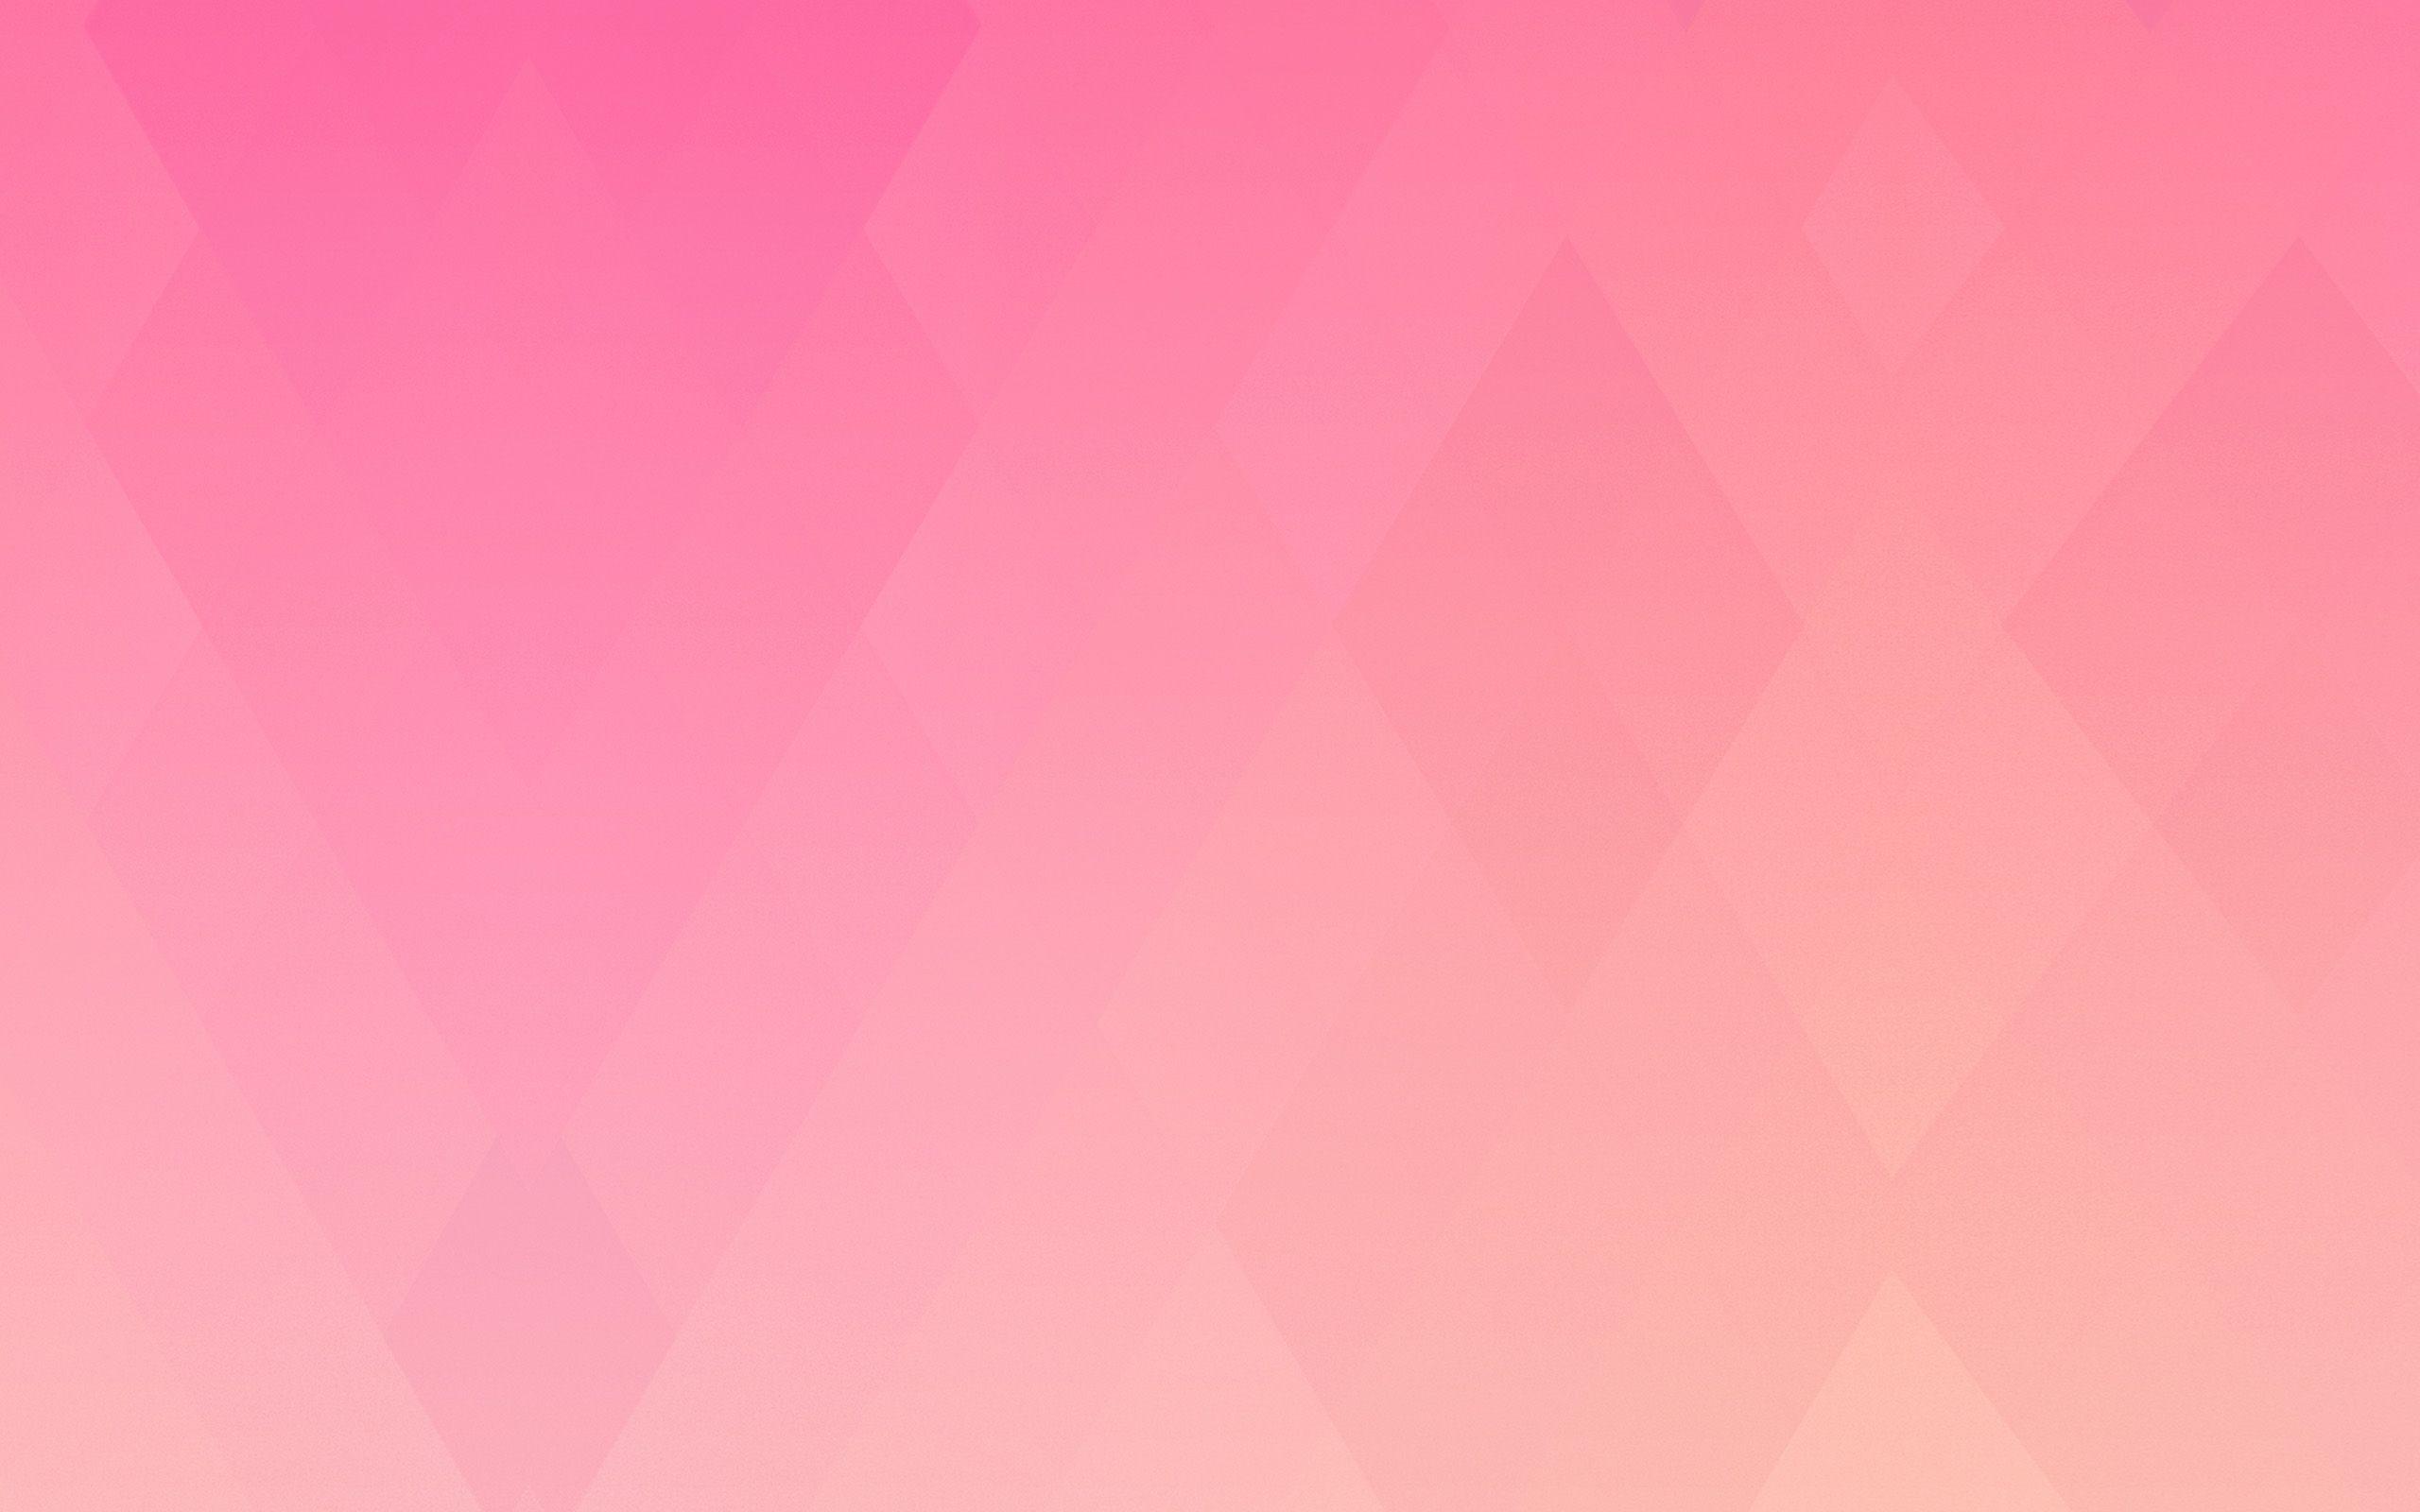 Pink Polygon Wallpapers - Top Free Pink Polygon Backgrounds ...